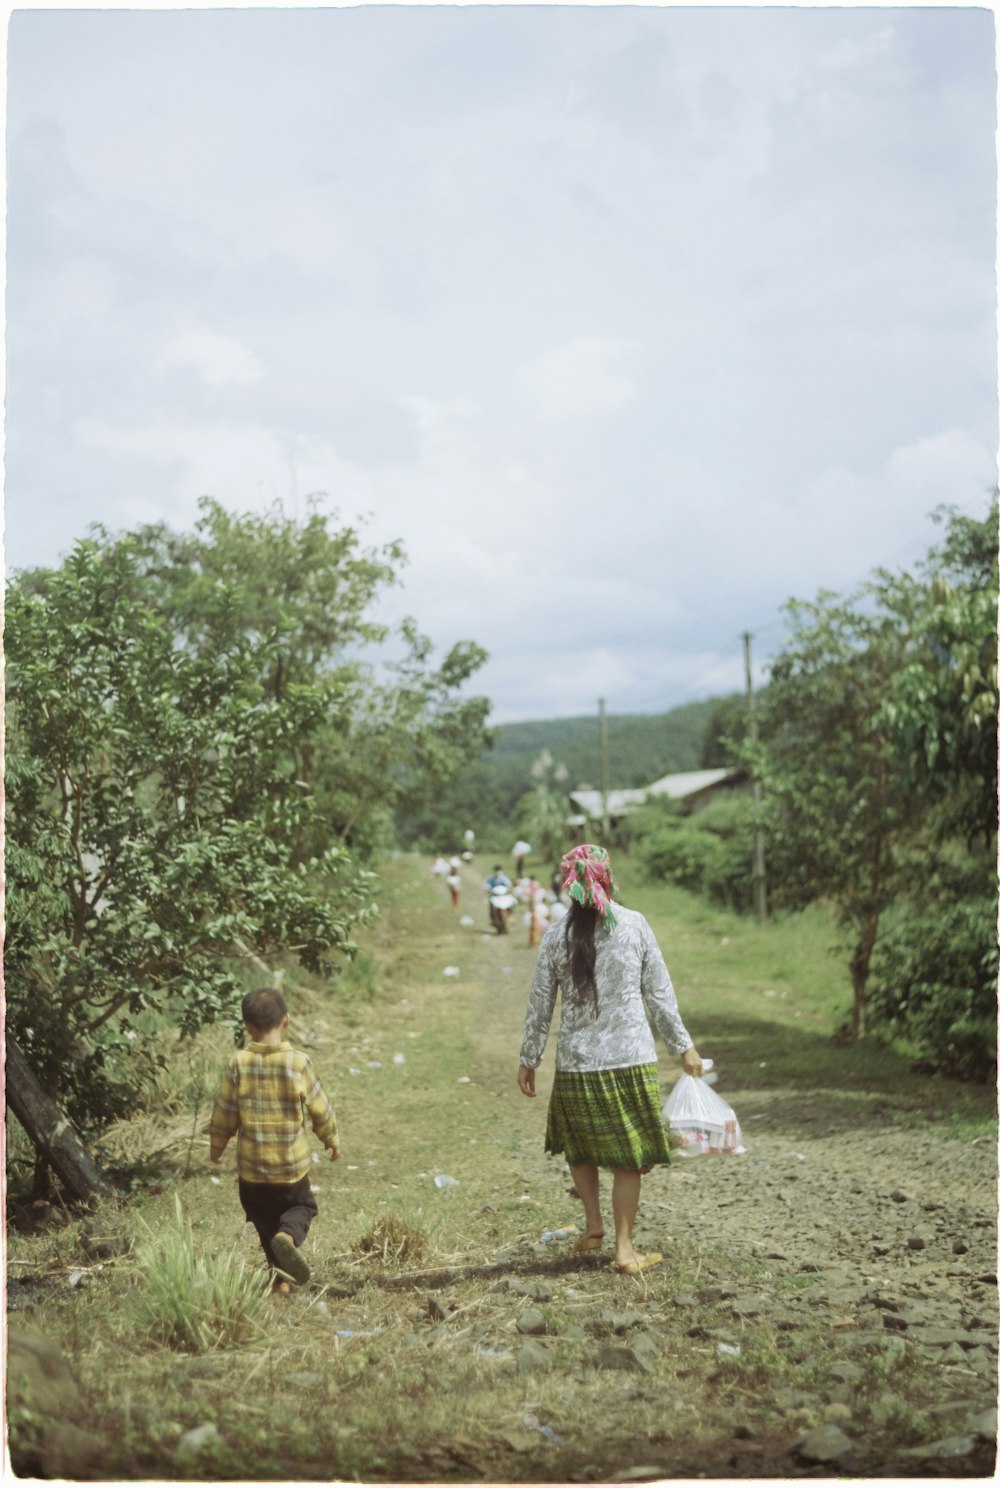 a woman and child walking down a dirt road